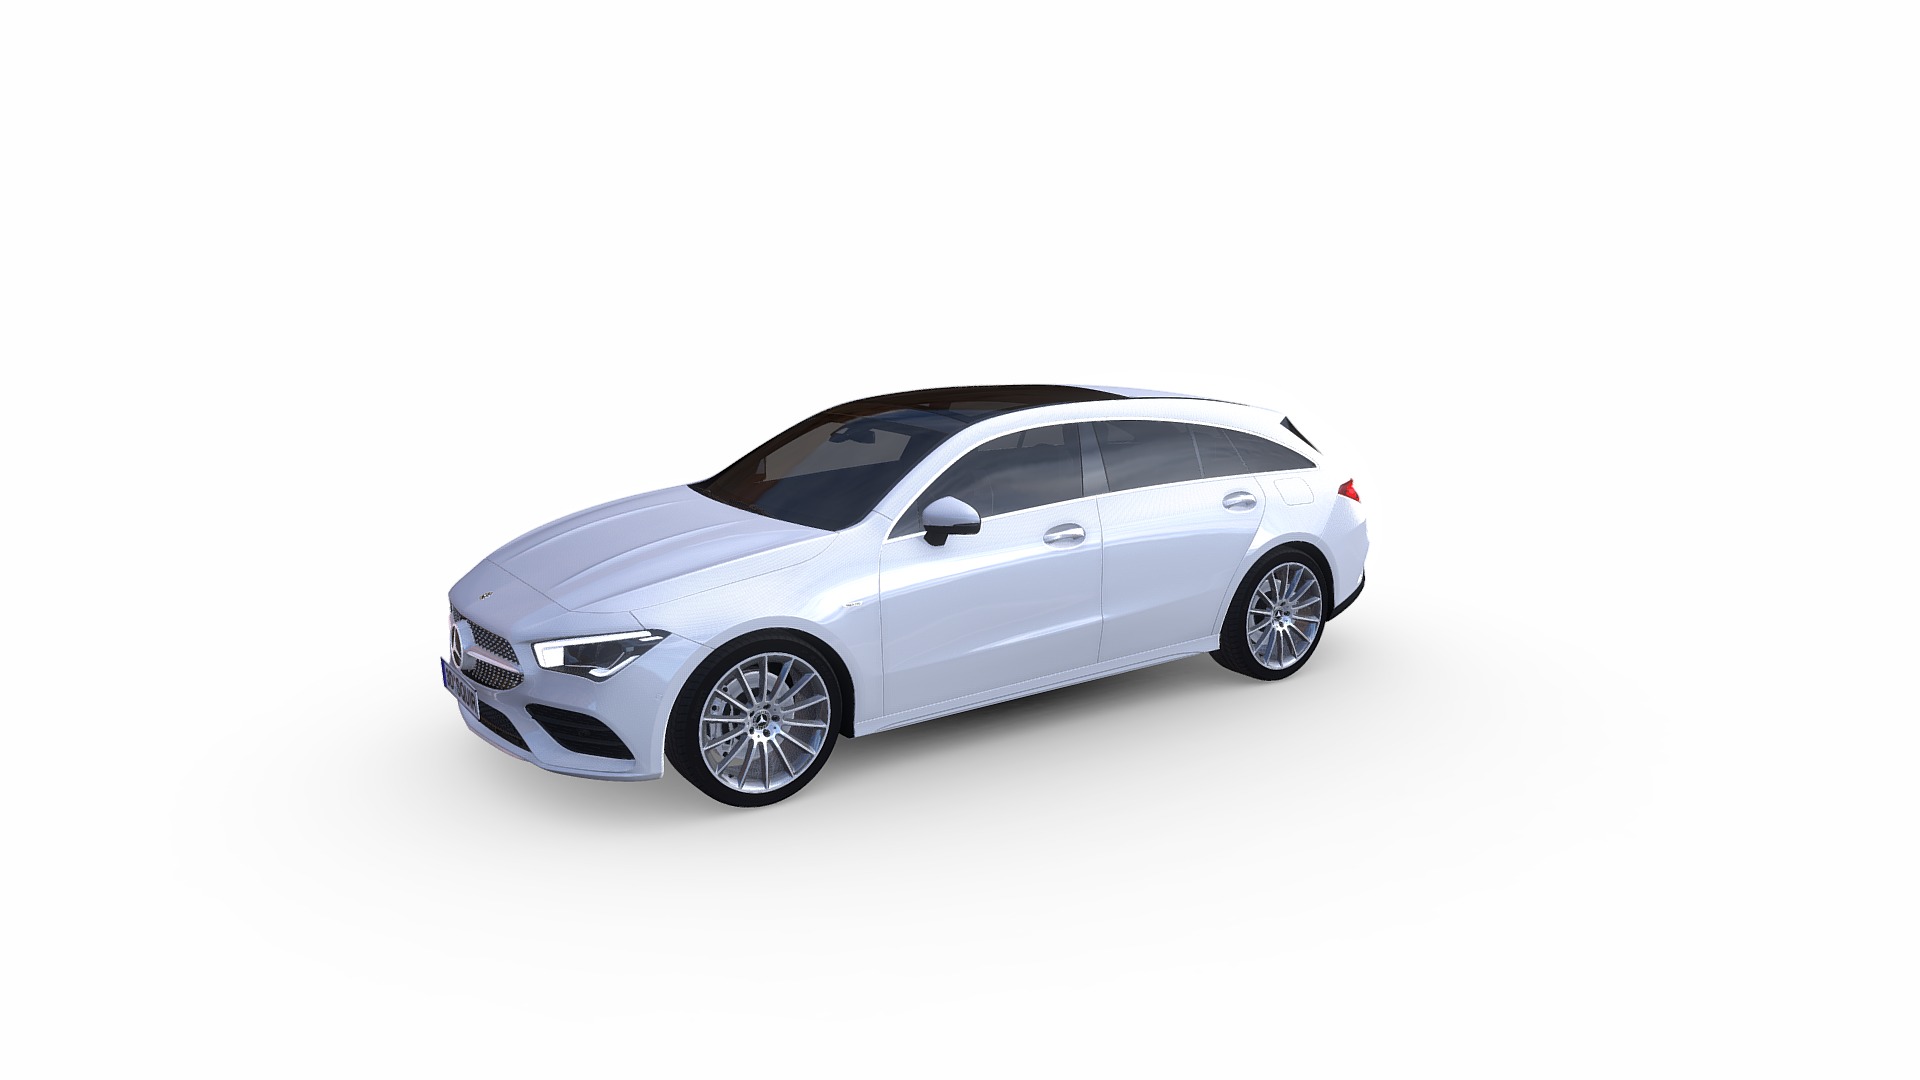 3D model Mercedes- Benz CLA Shooting Brake 2020 - This is a 3D model of the Mercedes- Benz CLA Shooting Brake 2020. The 3D model is about a white car with a black background.